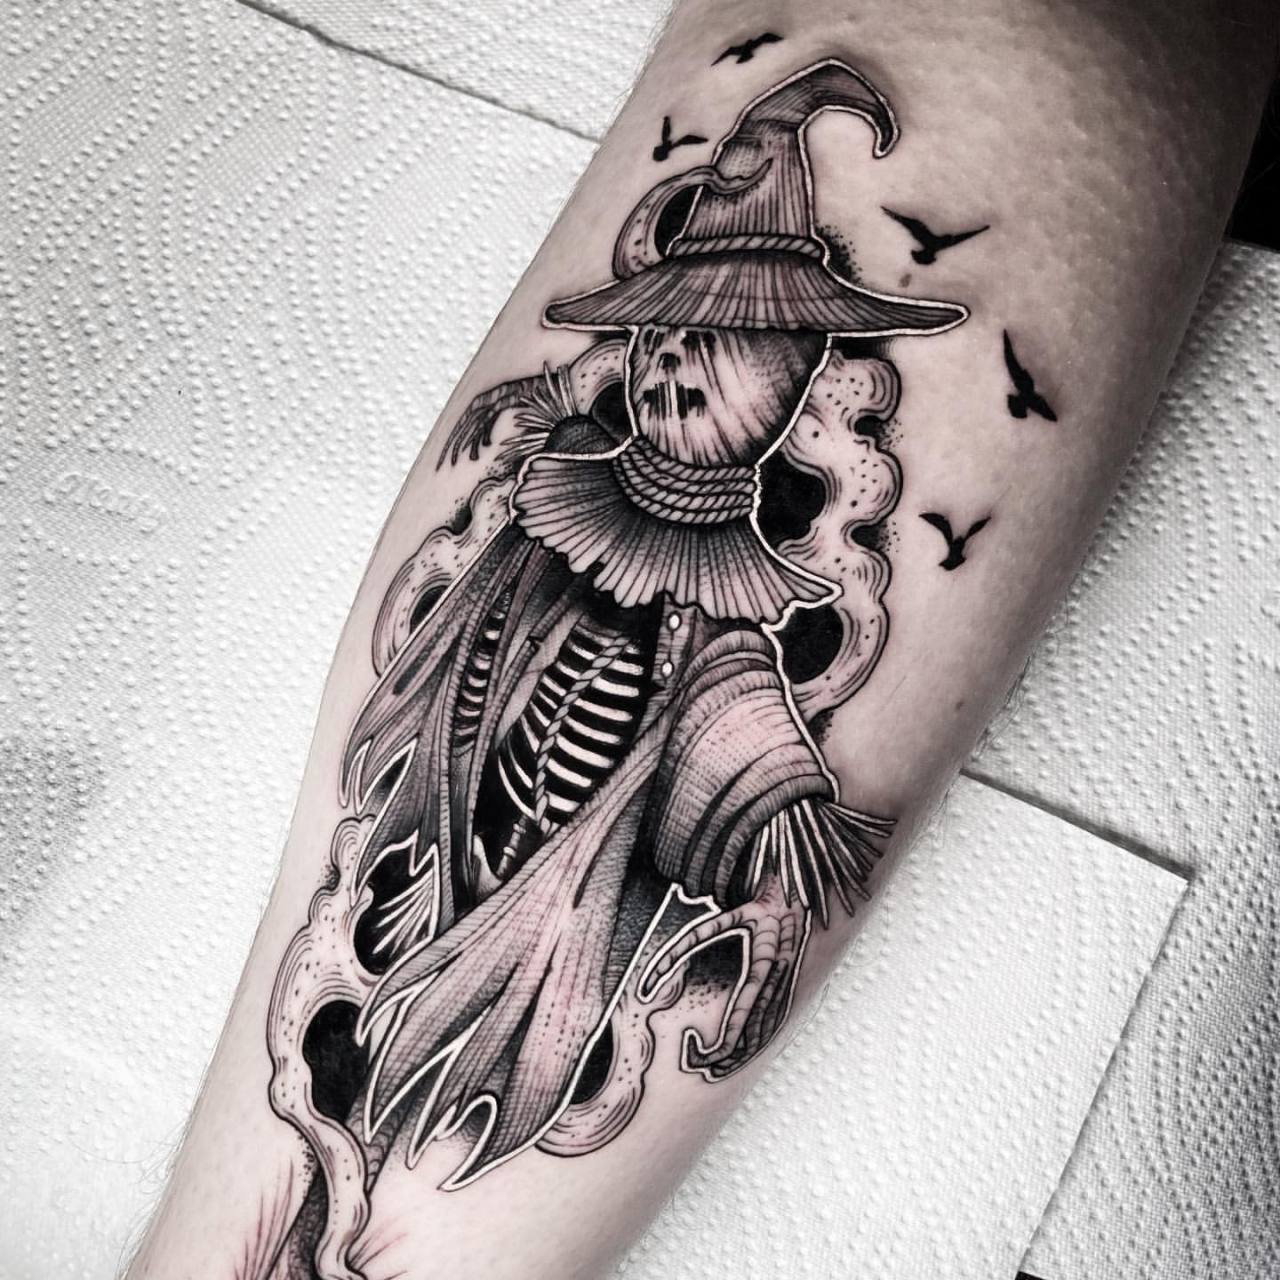 Scarecrow tattoo meaning